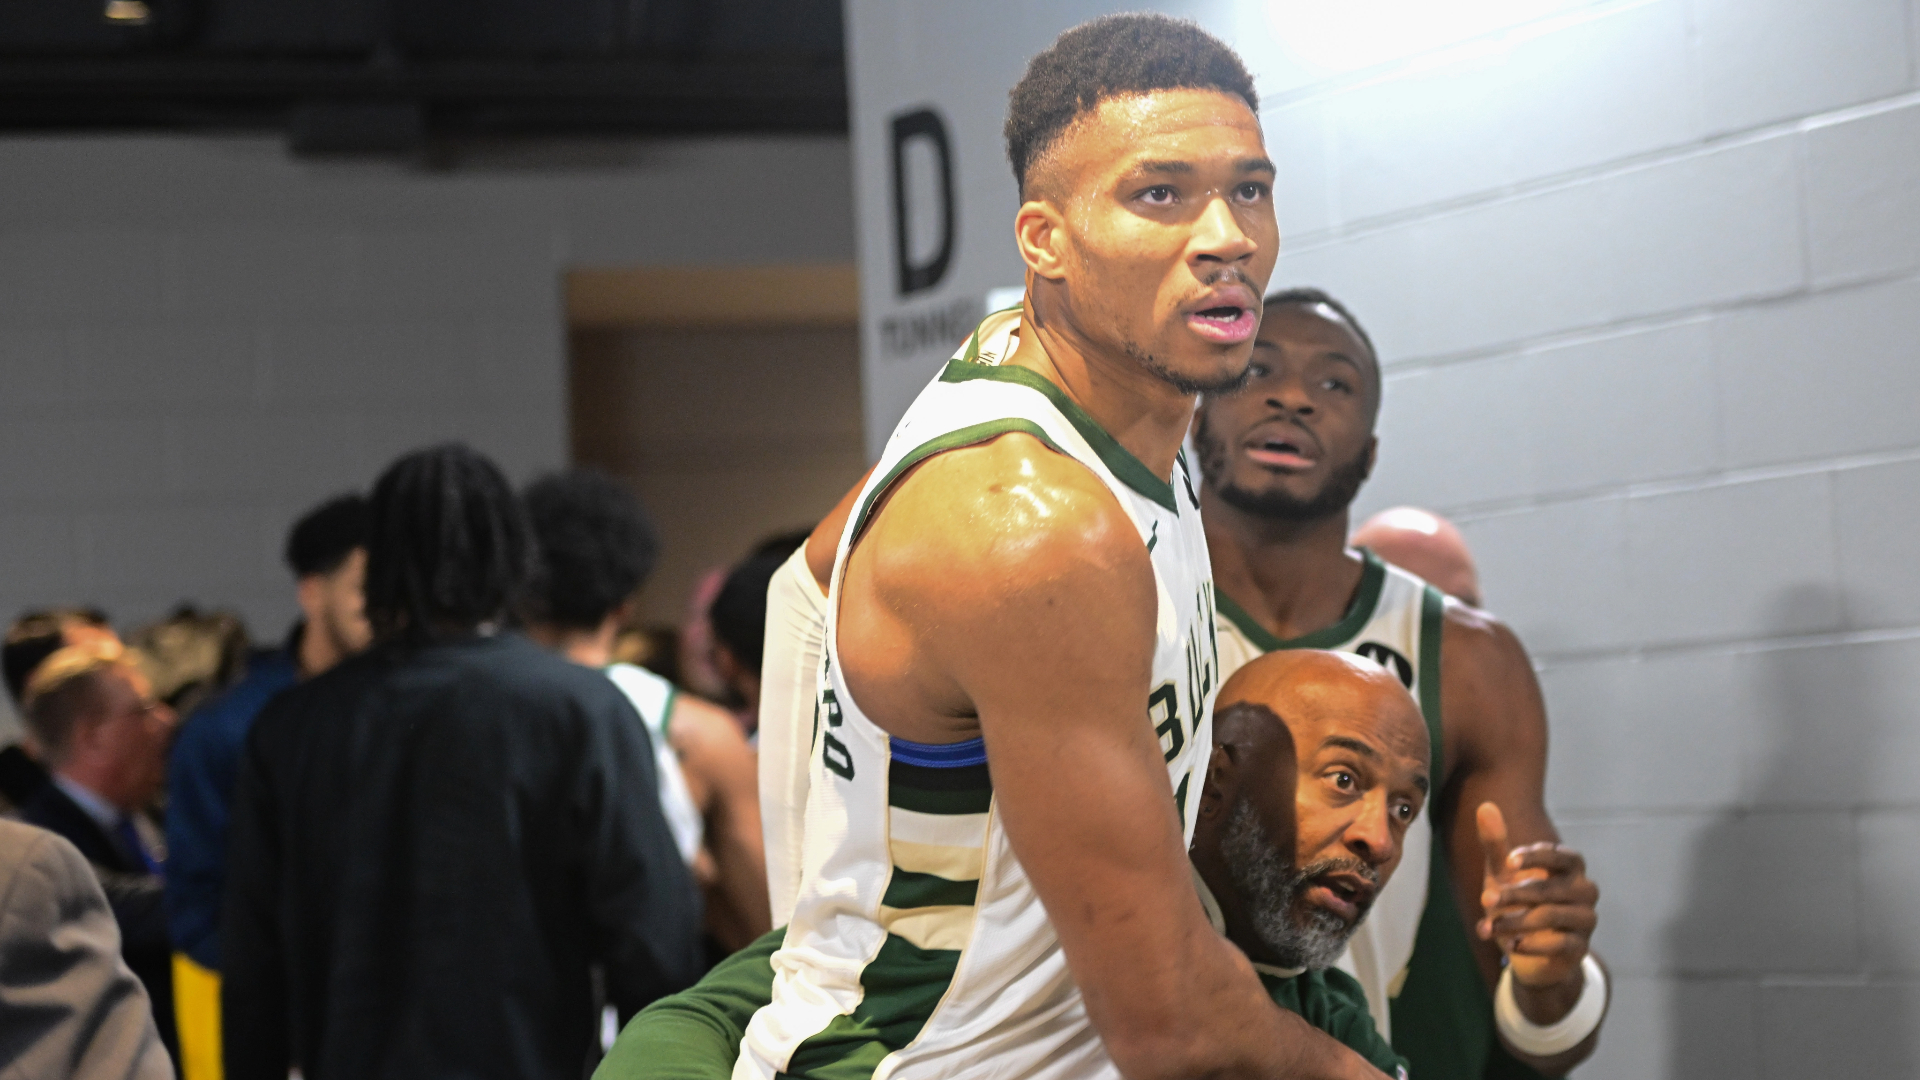 What To Know About Bizarre Giannis Antetokounmpo-Game Ball Controversy